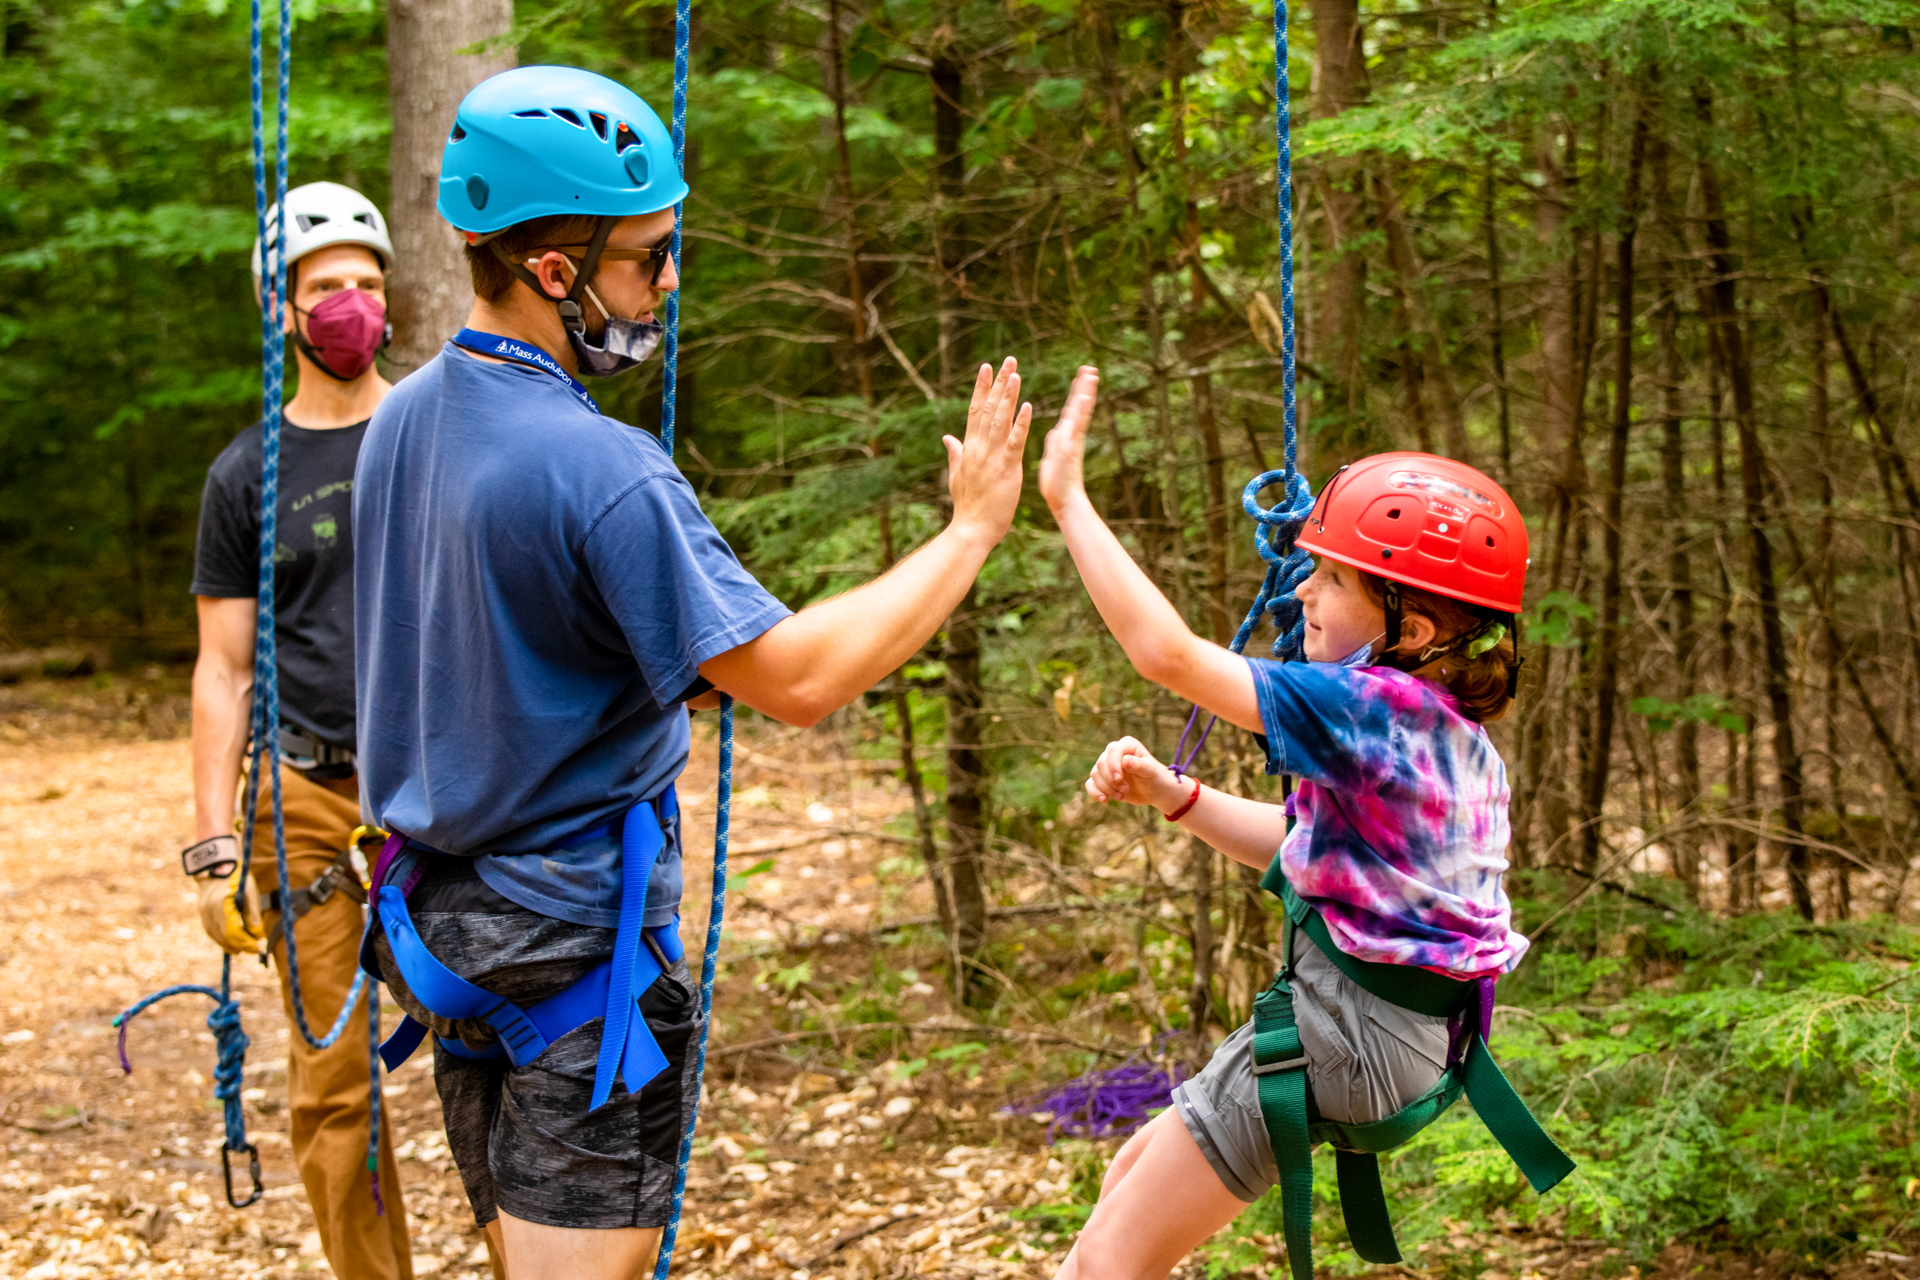 A Wildwood camper and counselor exchange a high five at the high ropes course. Both are wearing climbing helmets and harnesses, and the camper is hanging just above the ground.